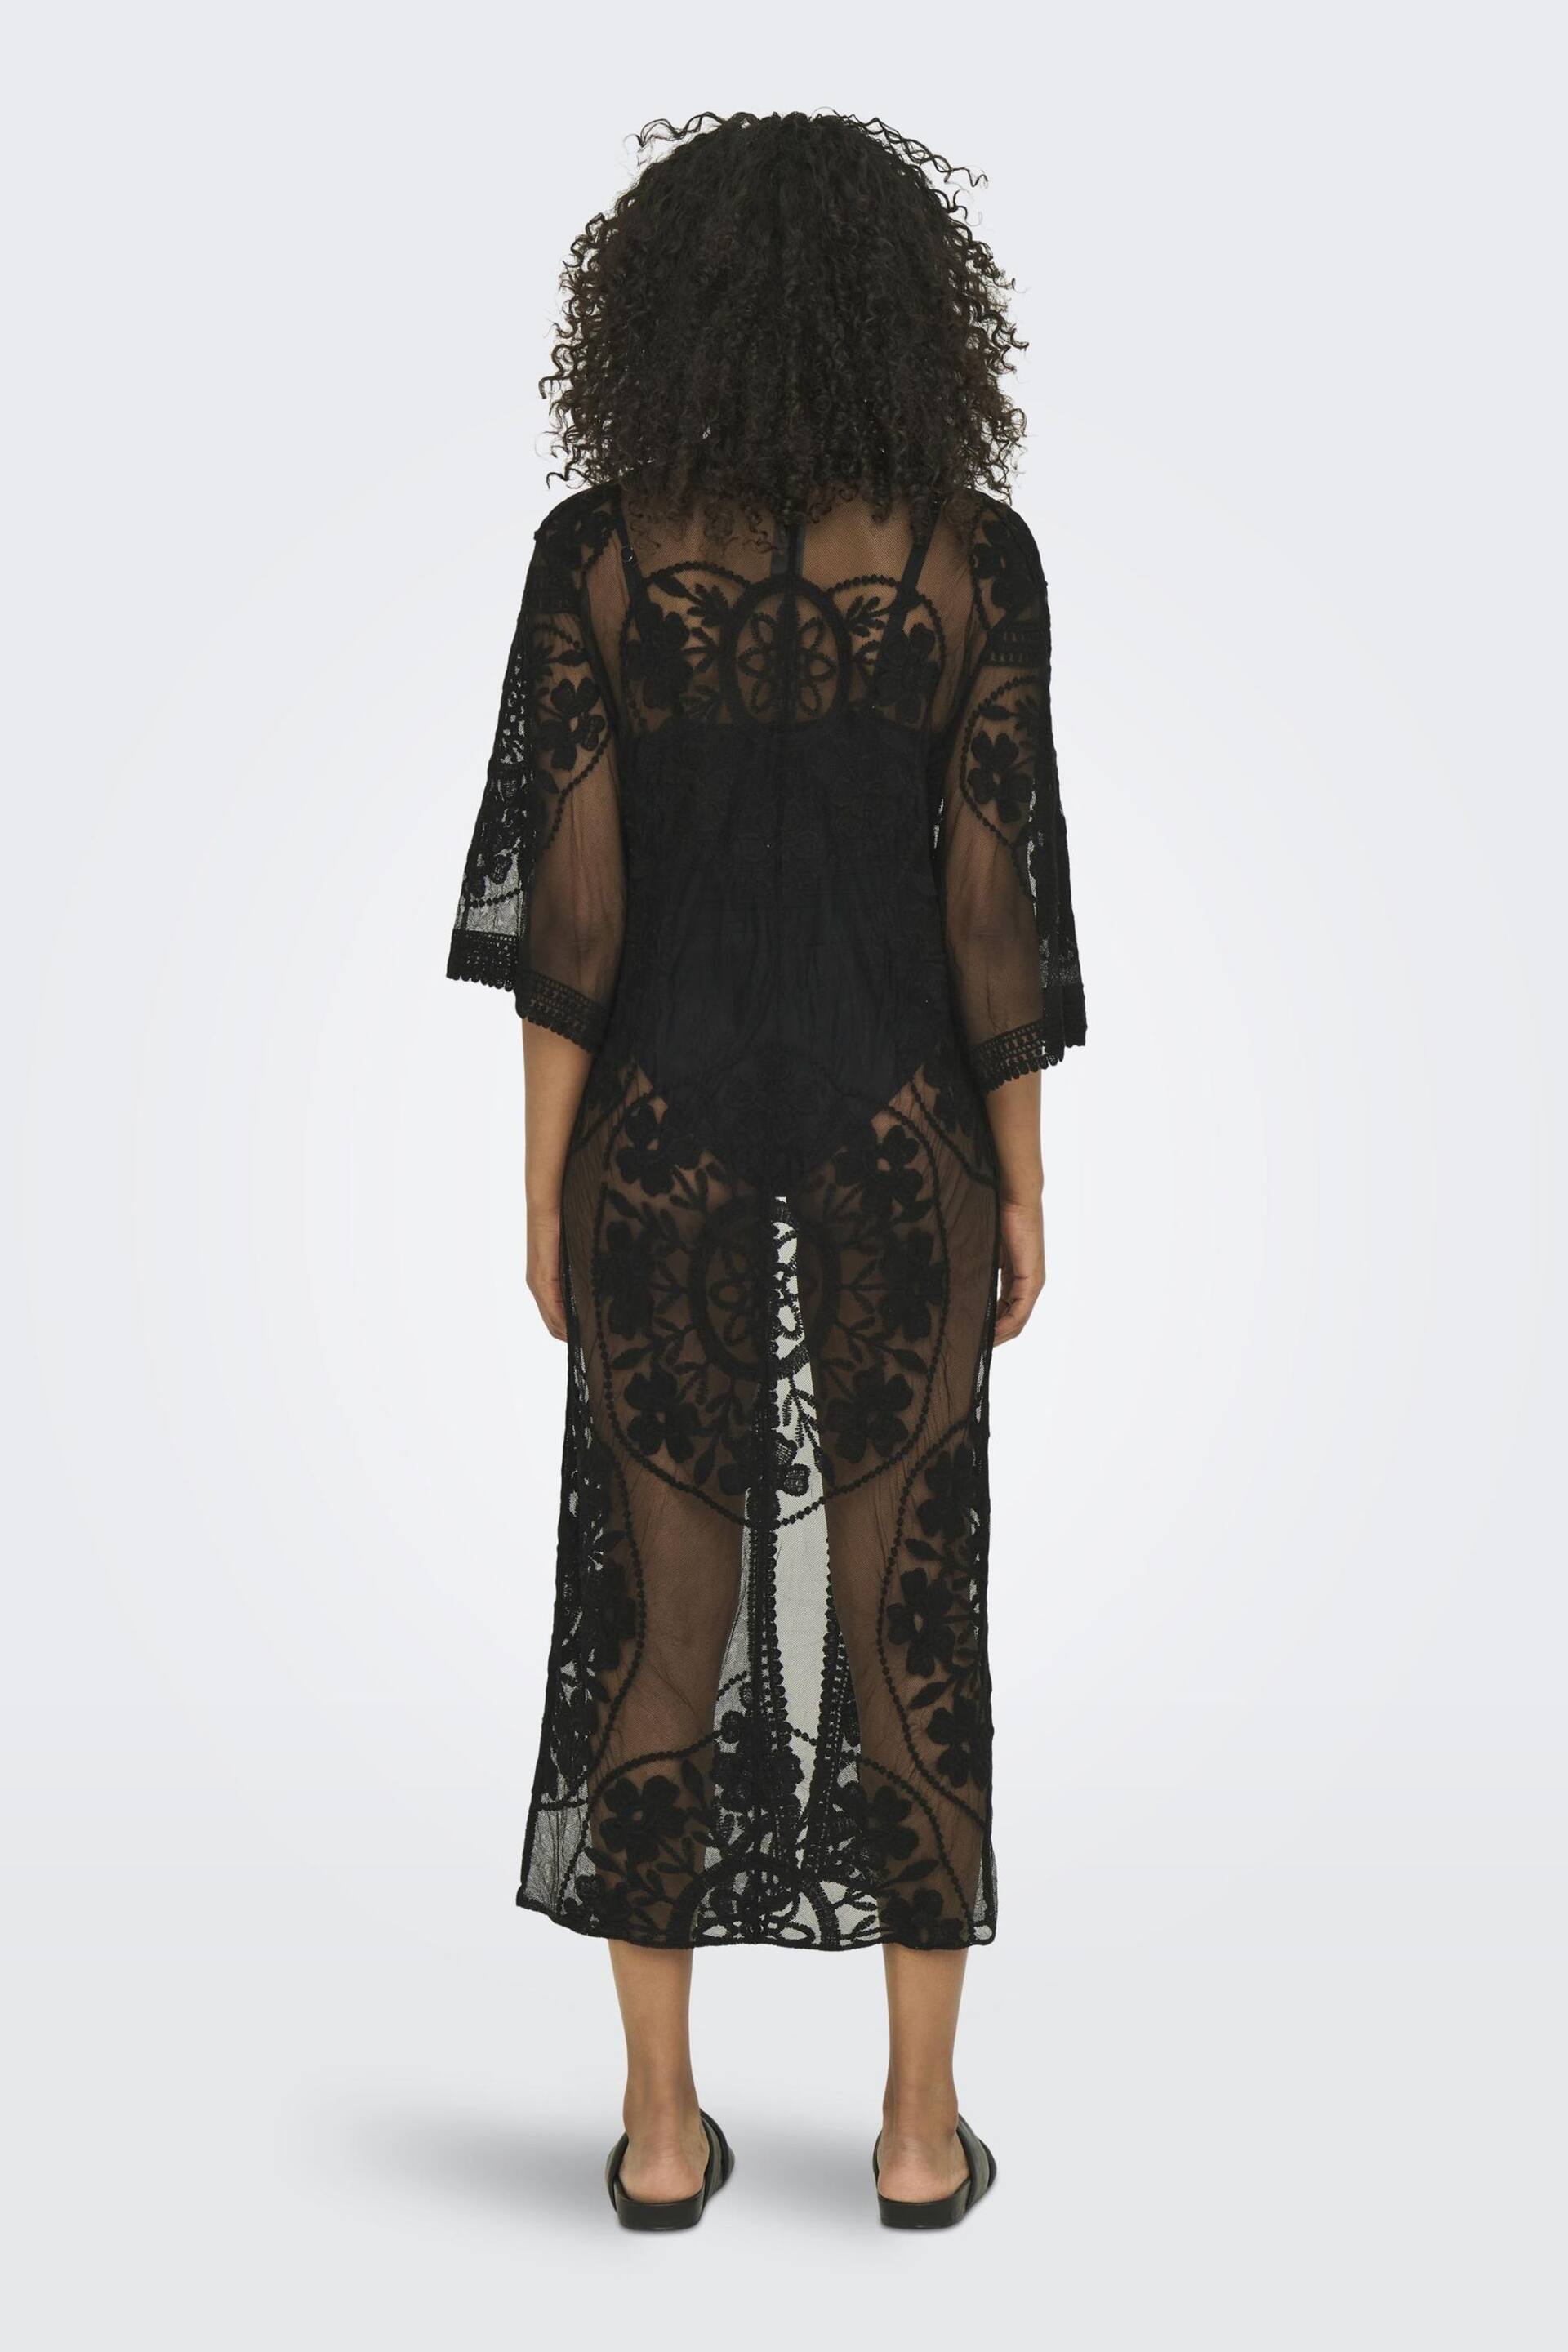 ONLY Black Embroidered Maxi Beach Cover-Up Kaftan - Image 2 of 7